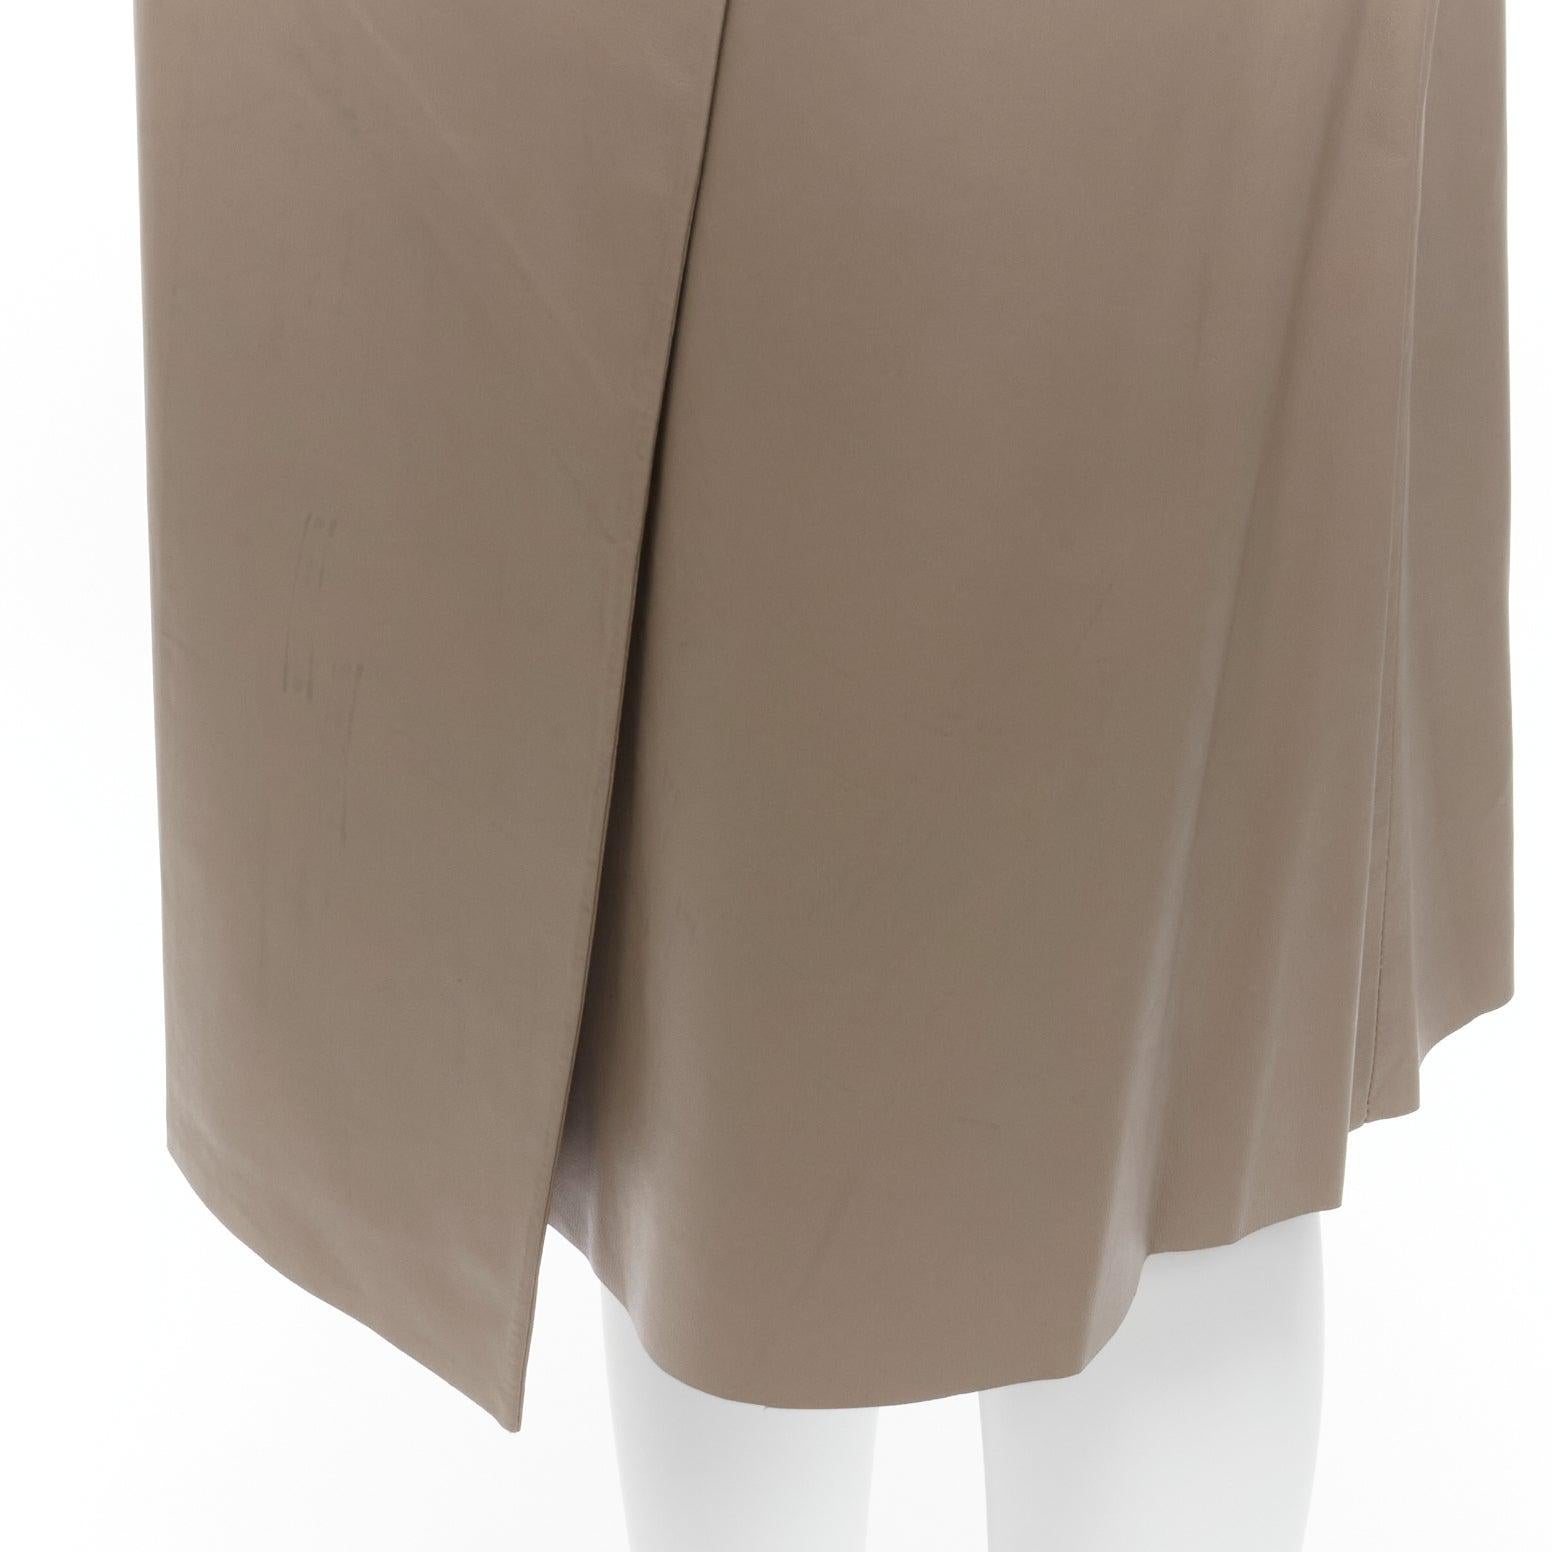 JOSEPH Charlene stone beige lambskin leather minimal split A-line wrap skirt FR36 S
Reference: SNKO/A00312
Brand: Joseph
Model: Charlene
Material: Leather
Color: Beige
Pattern: Solid
Closure: Zip
Lining: Black Fabric
Extra Details: Side zip detail.